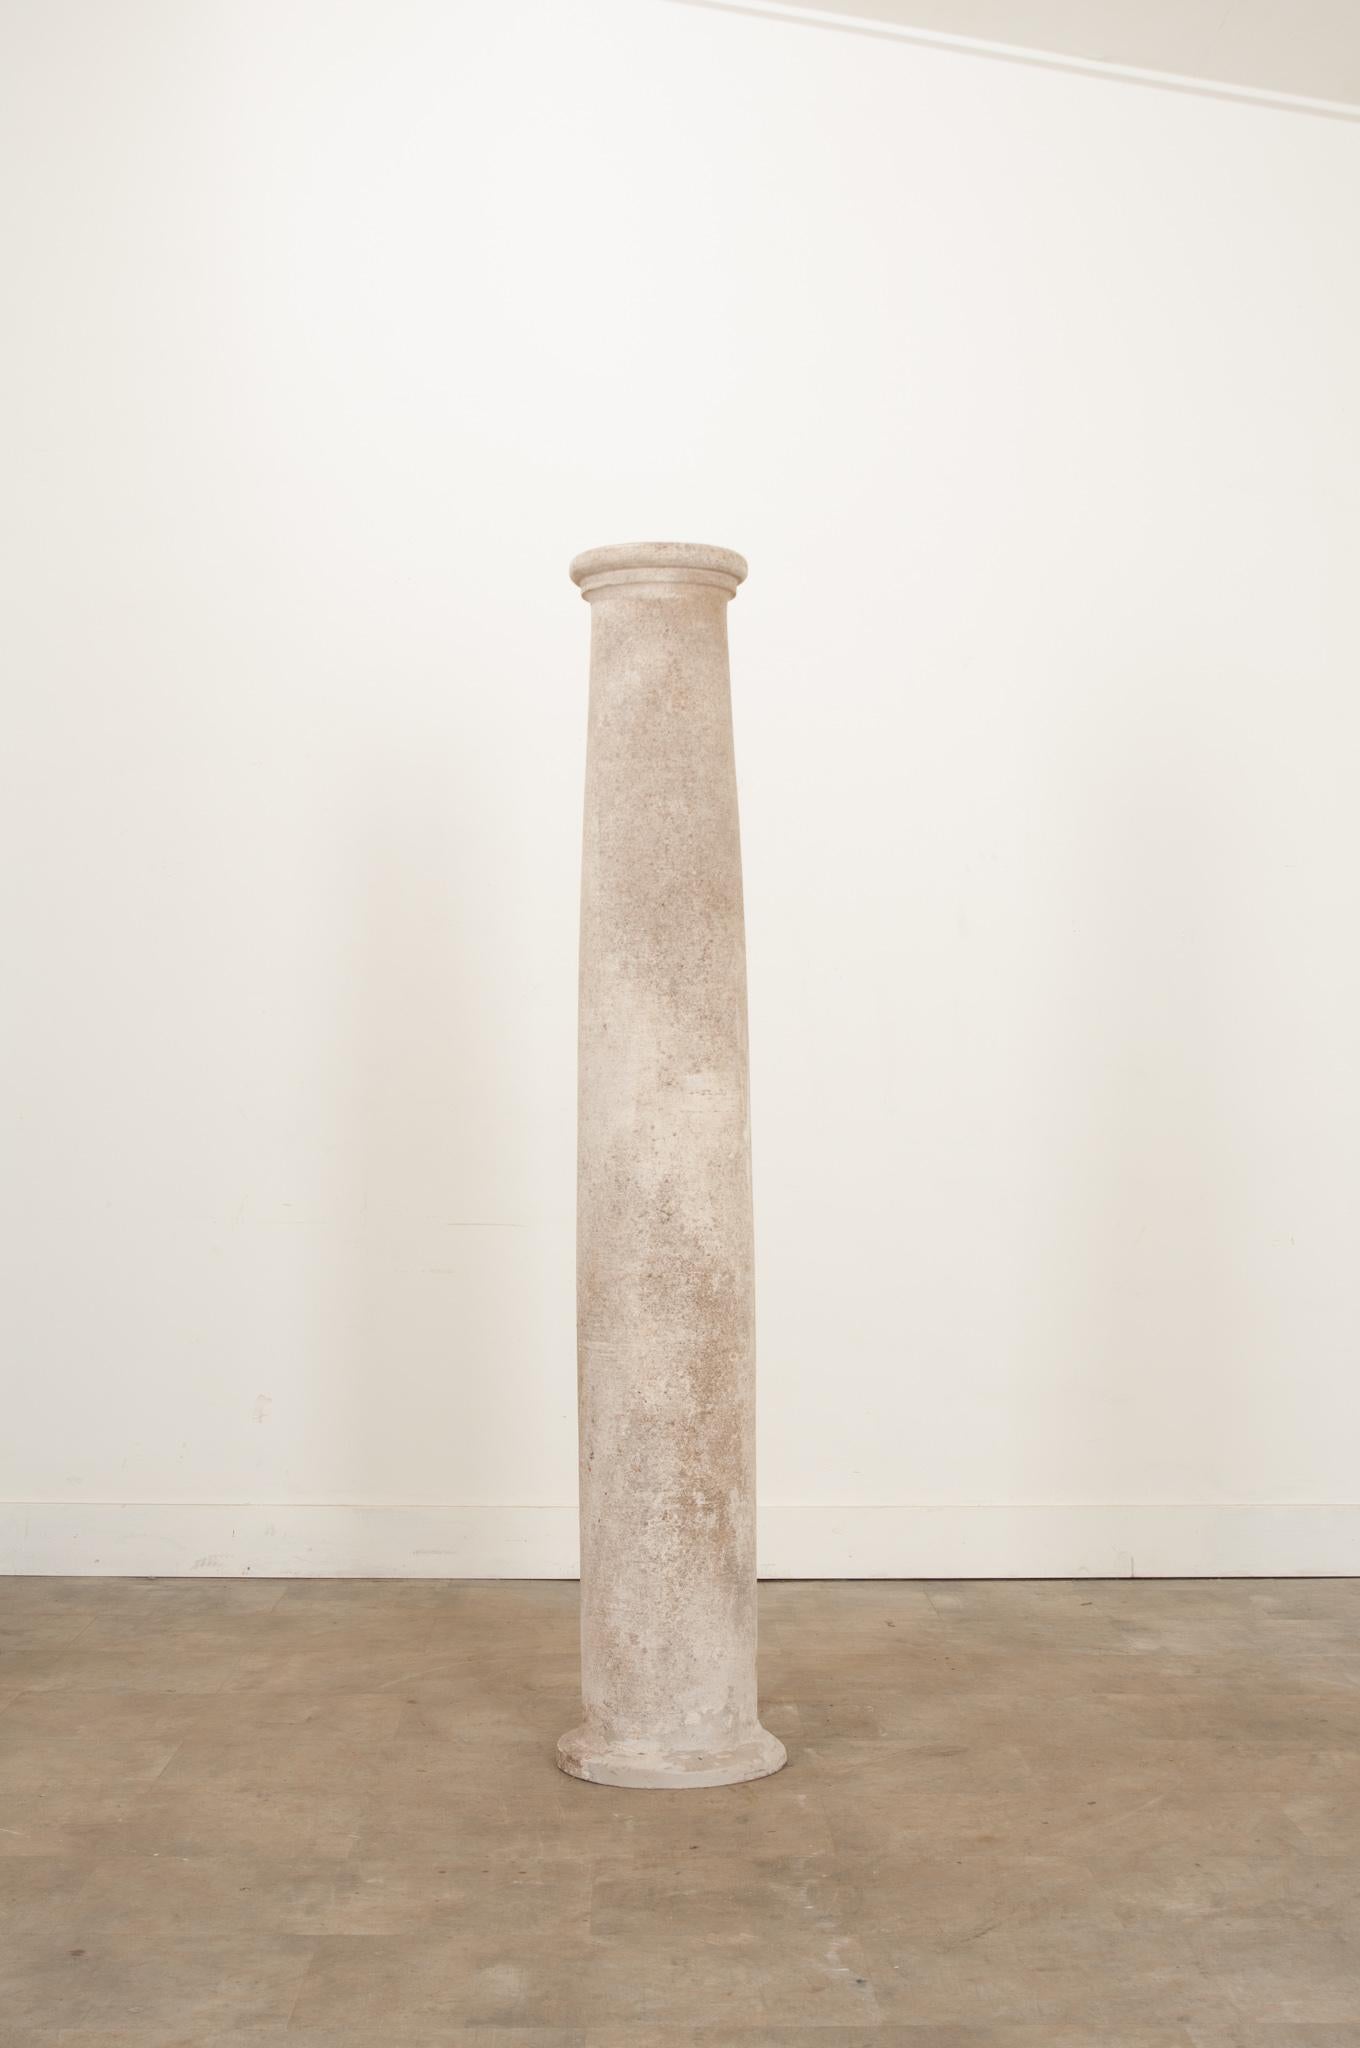 The Tuscan column-plain, without carvings and ornaments-represents one of the five orders of classical architecture and is a defining detail of today’s building. Tuscan is one of the oldest and most simple architectural forms practiced in ancient